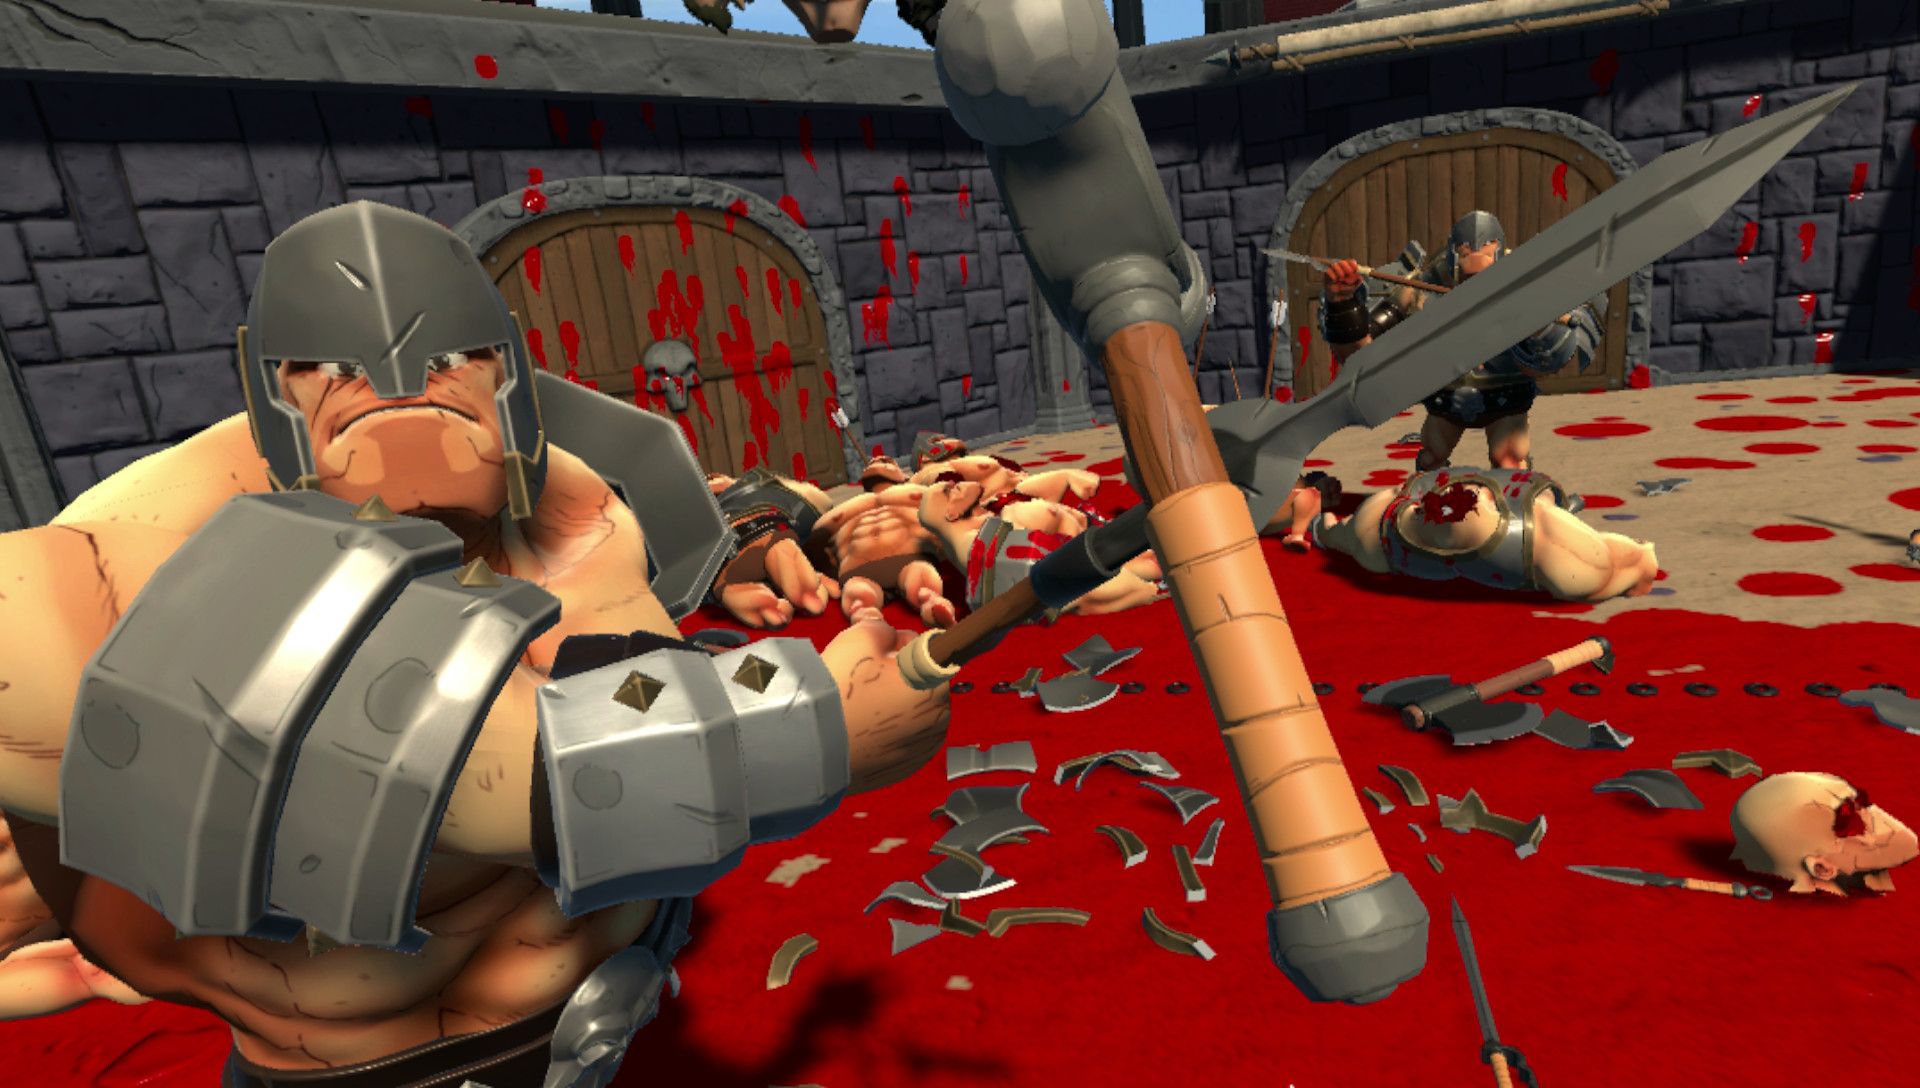 VR and brutality abound